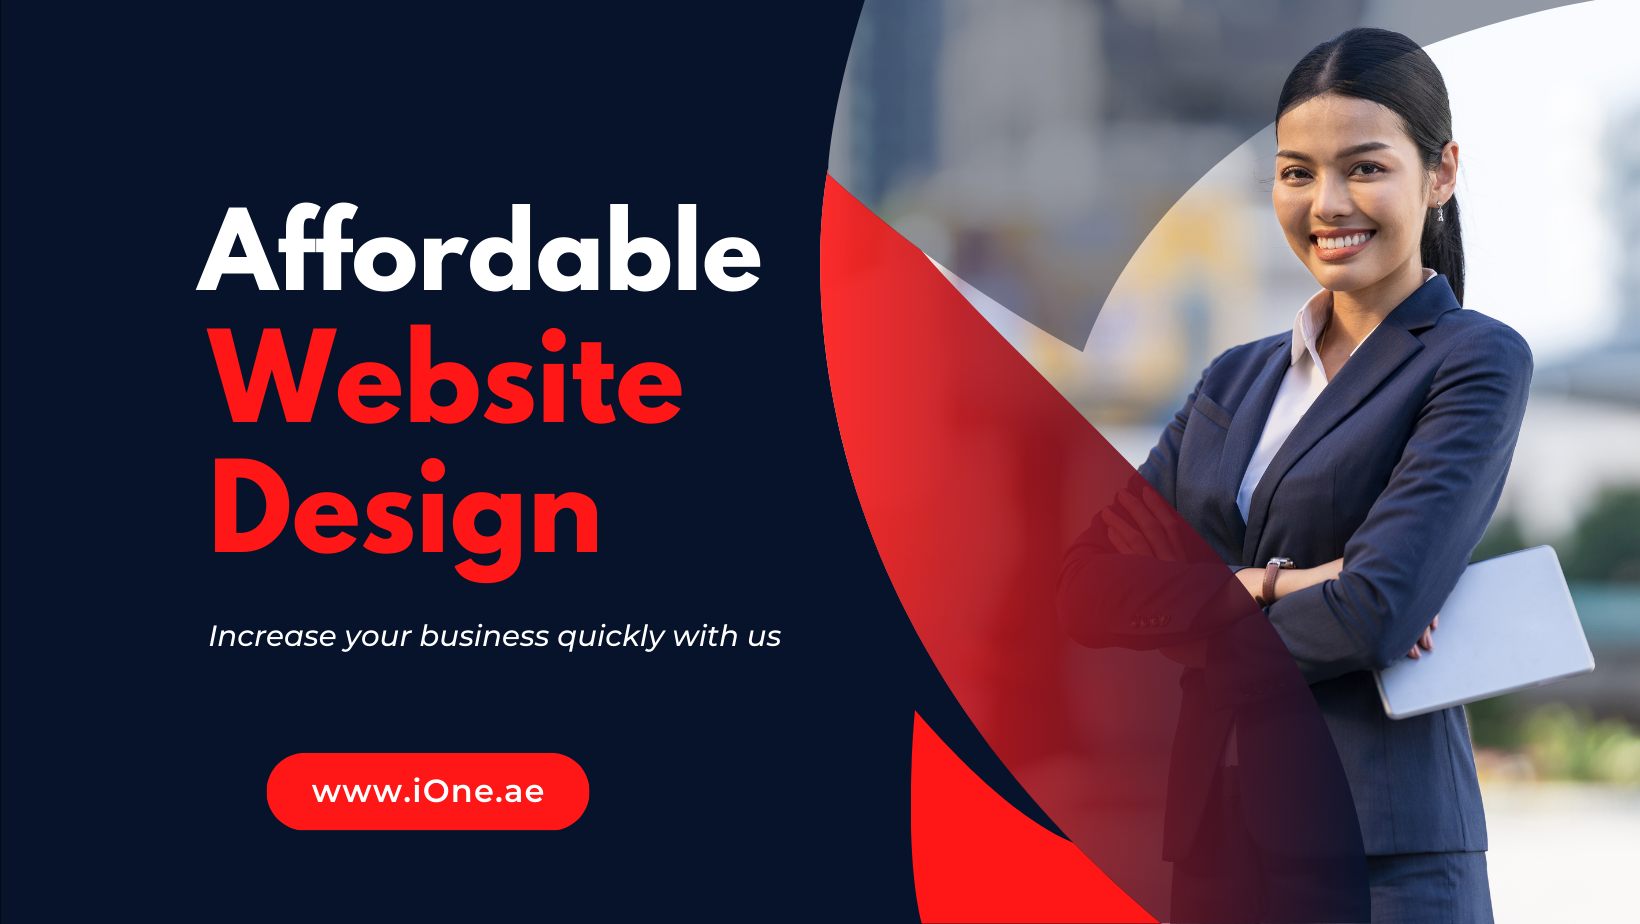 Looking for affordable website design services in UAE ? Our company offers high-quality web design at low cost. Contact us today for a personalized quote.